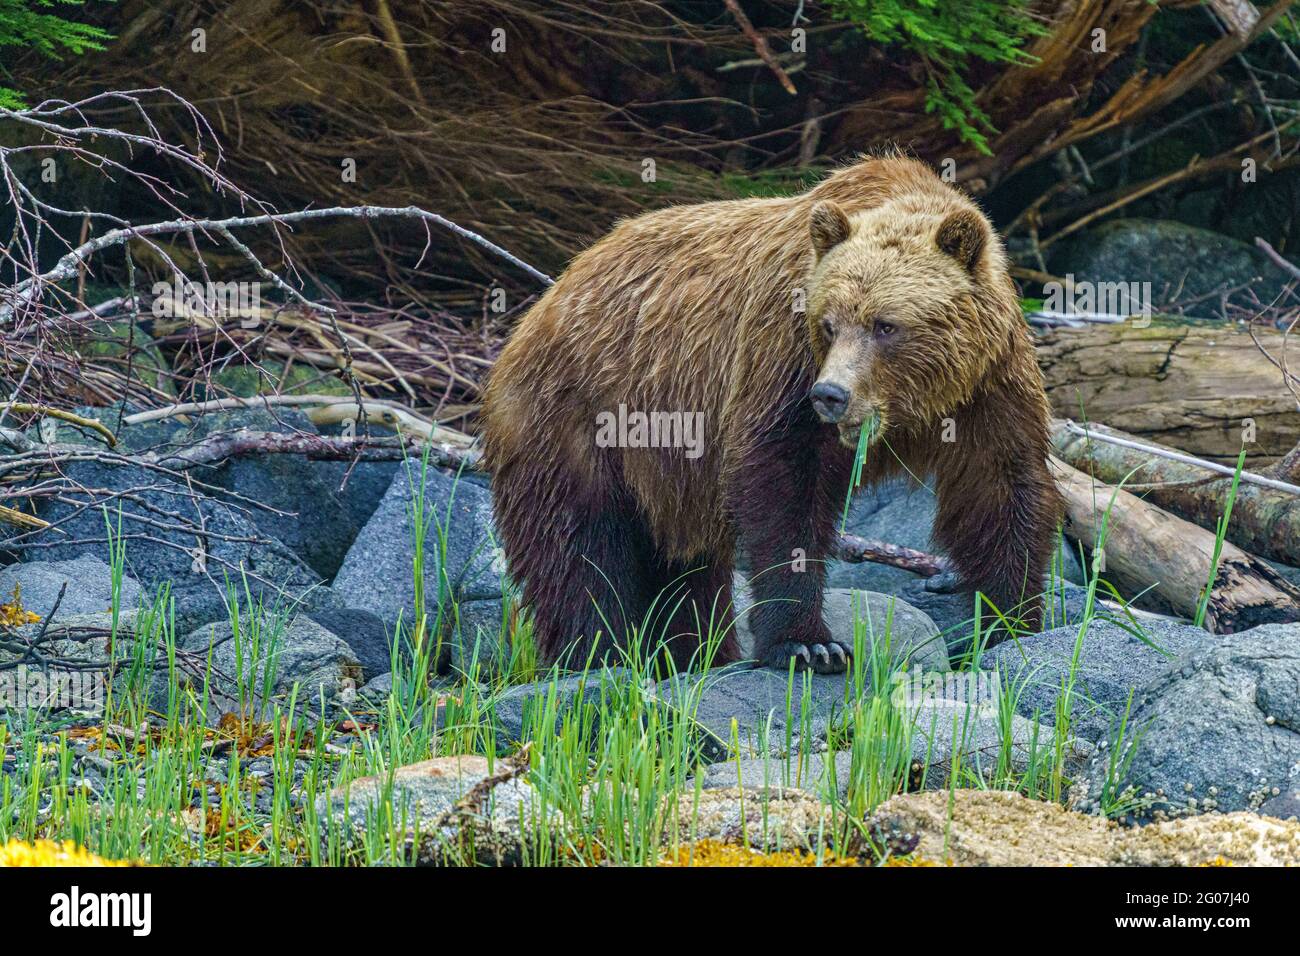 Coastal grizzly bear (brown bear, Ursus arctos) foraging on  Sedge grass in Knight Inlet, Great Bear Rainforest, First Nations Territory, British Colu Stock Photo